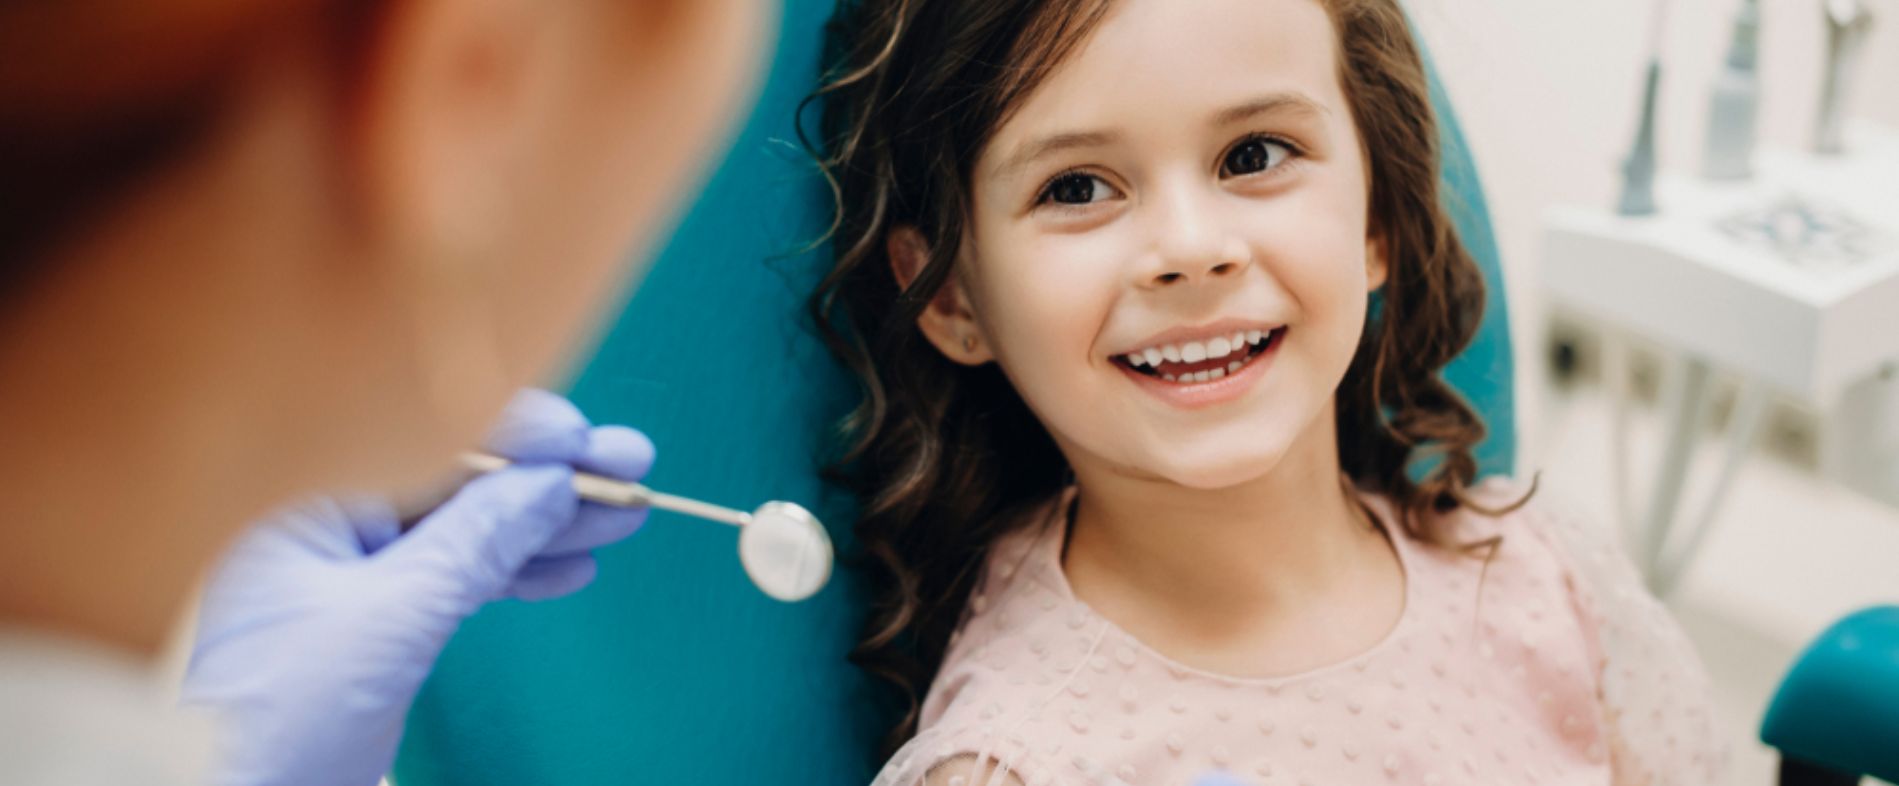 Common Dental Myths and Facts for Children in Stafford, TX.